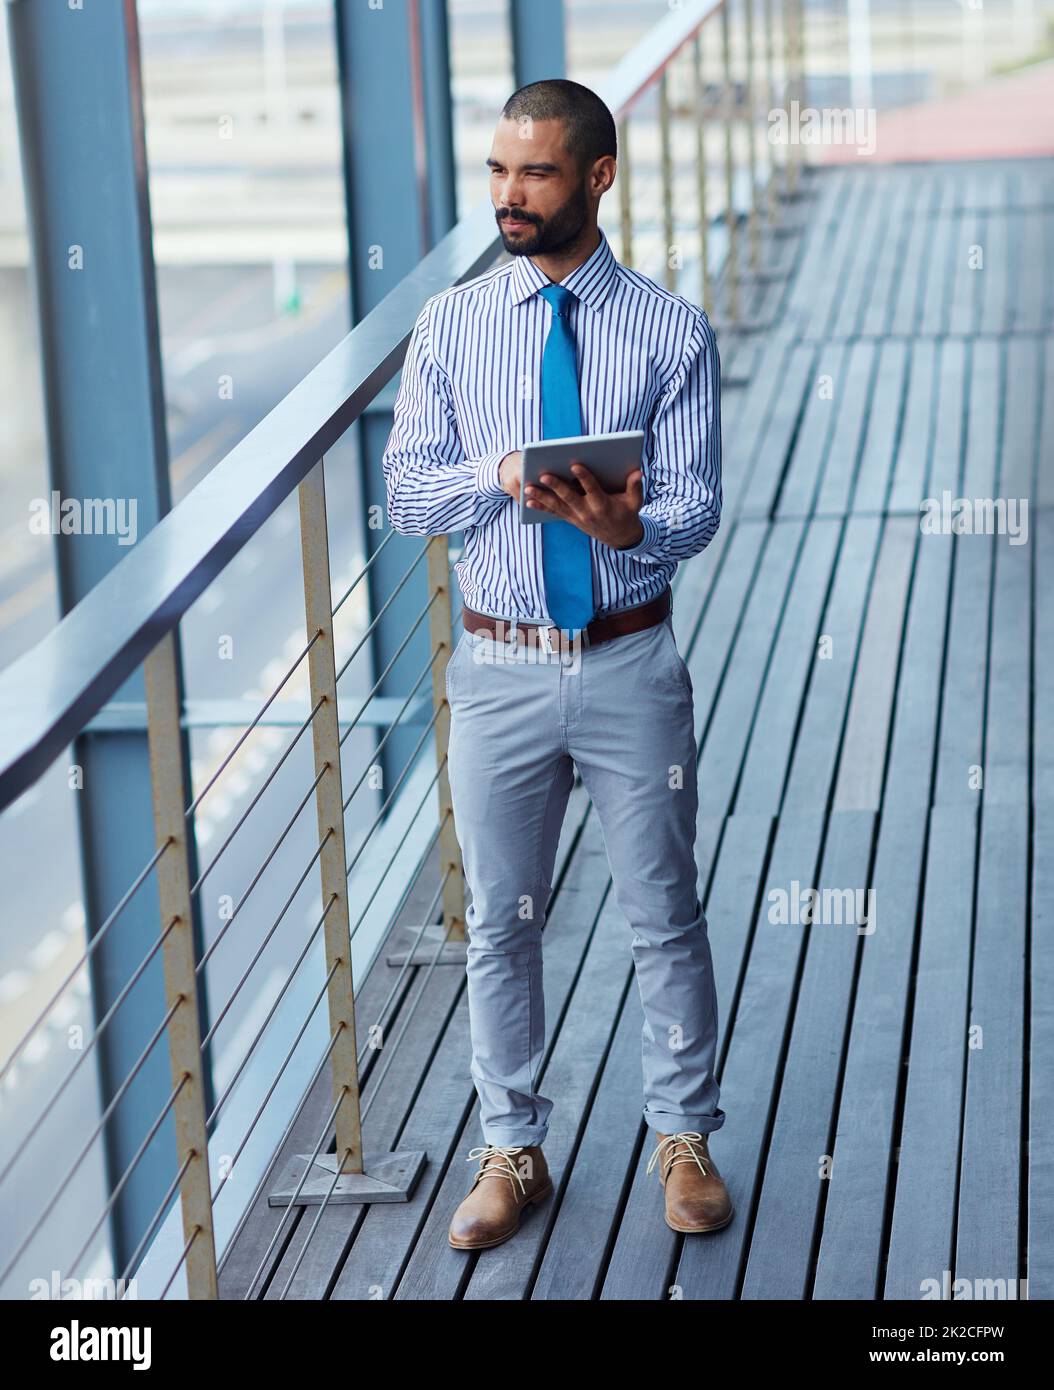 Technology brings business closer to him. Shot of a young businessman using a digital tablet outside of an office building. Stock Photo